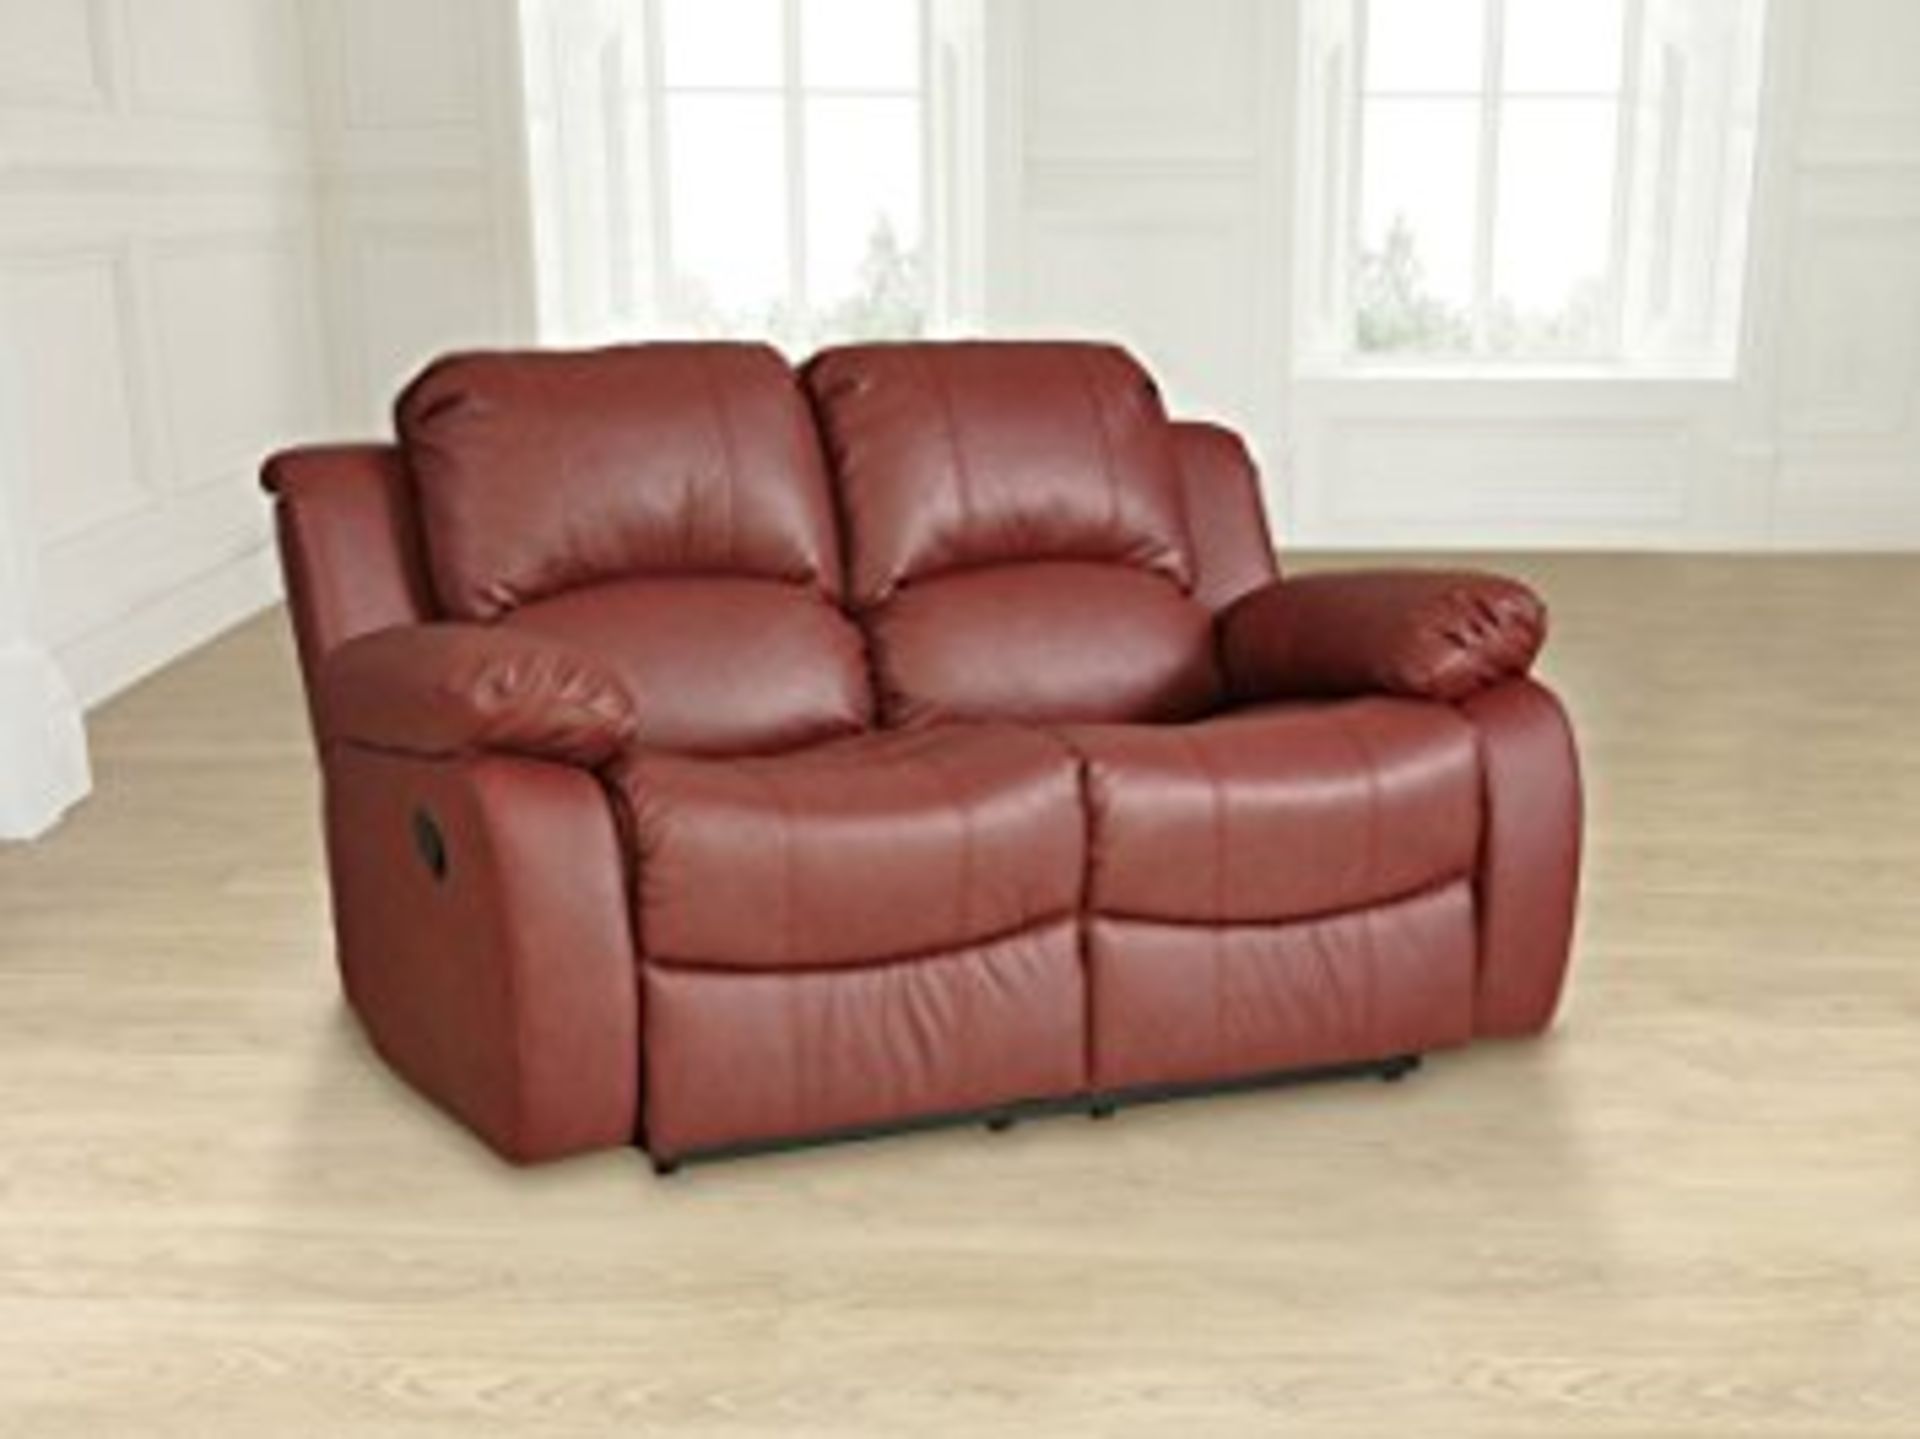 Supreme Valance burgandy leather 3 seater reclining sofa with console and matching 2 seater - Image 3 of 3